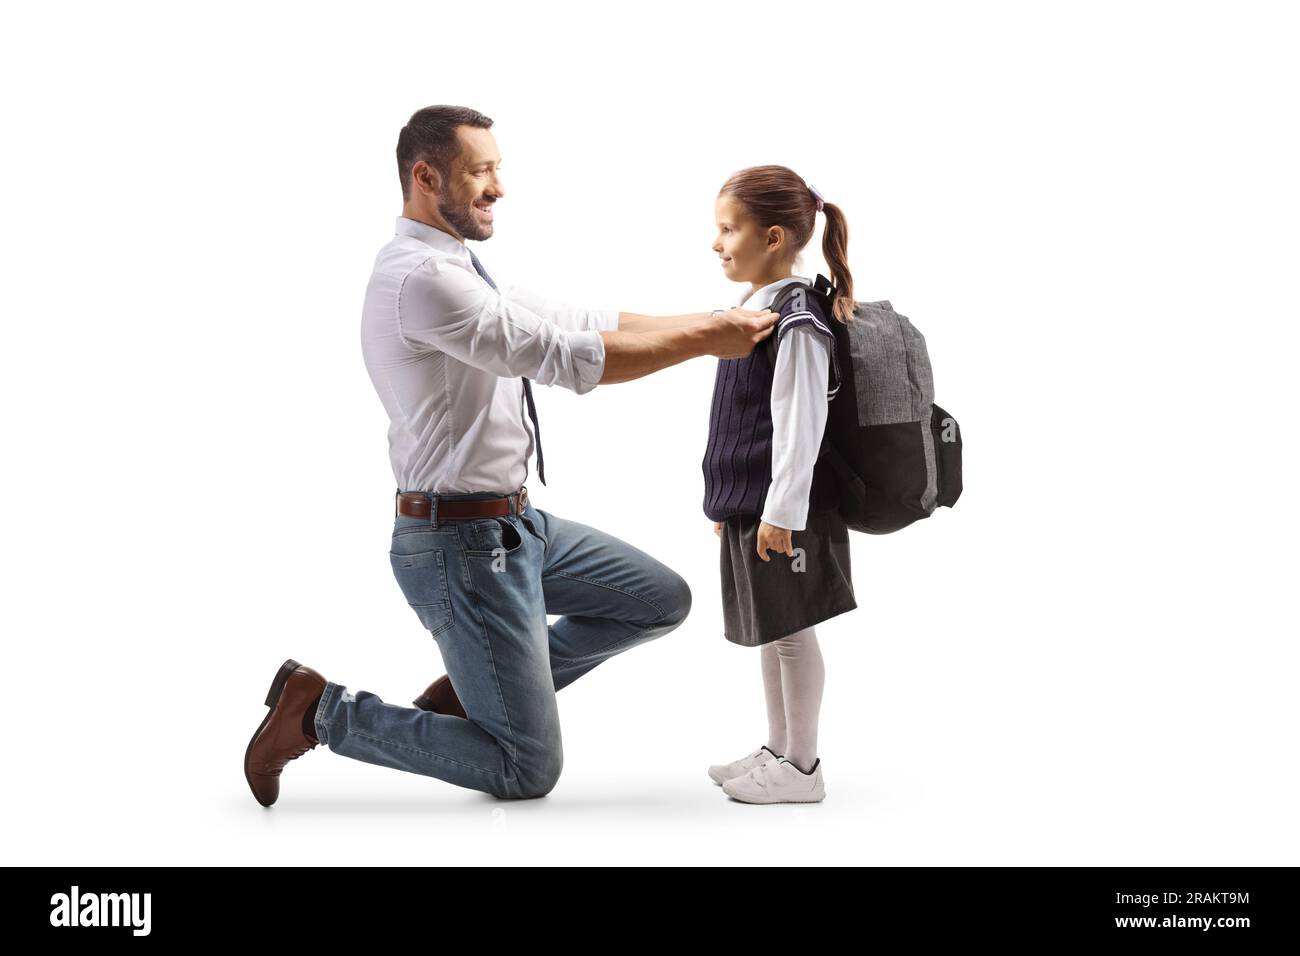 Full length profile shot of a father helping a girl getting ready for school isolated on white background Stock Photo